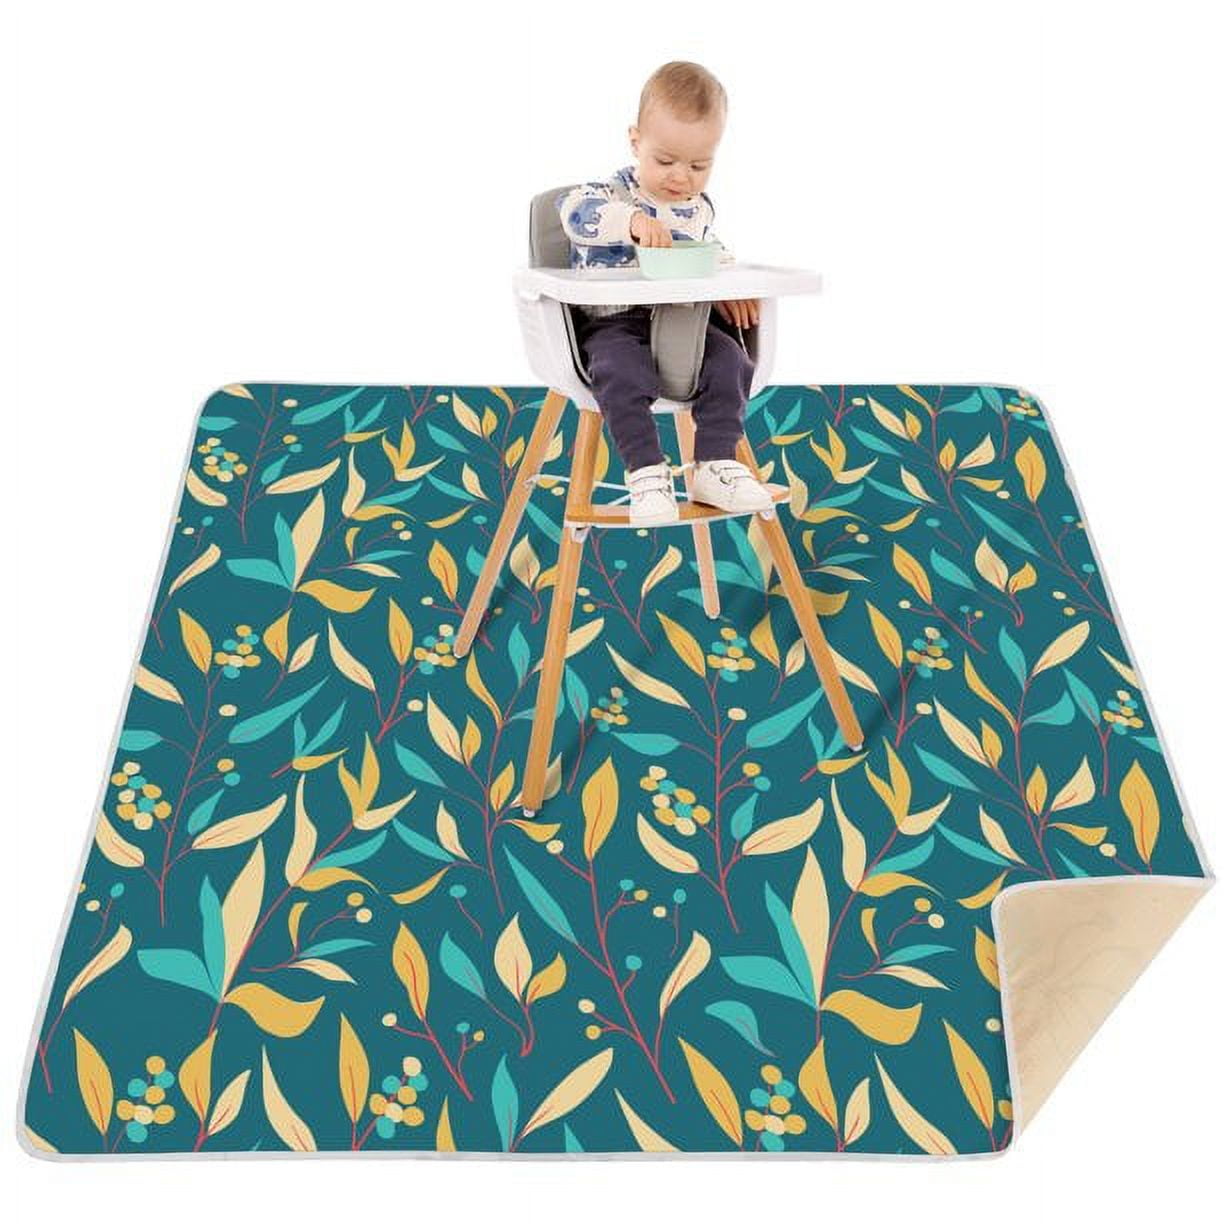 Large Splat Mat For Under High Chair/Arts/Craft/Picnic/Play Waterproof  72x54